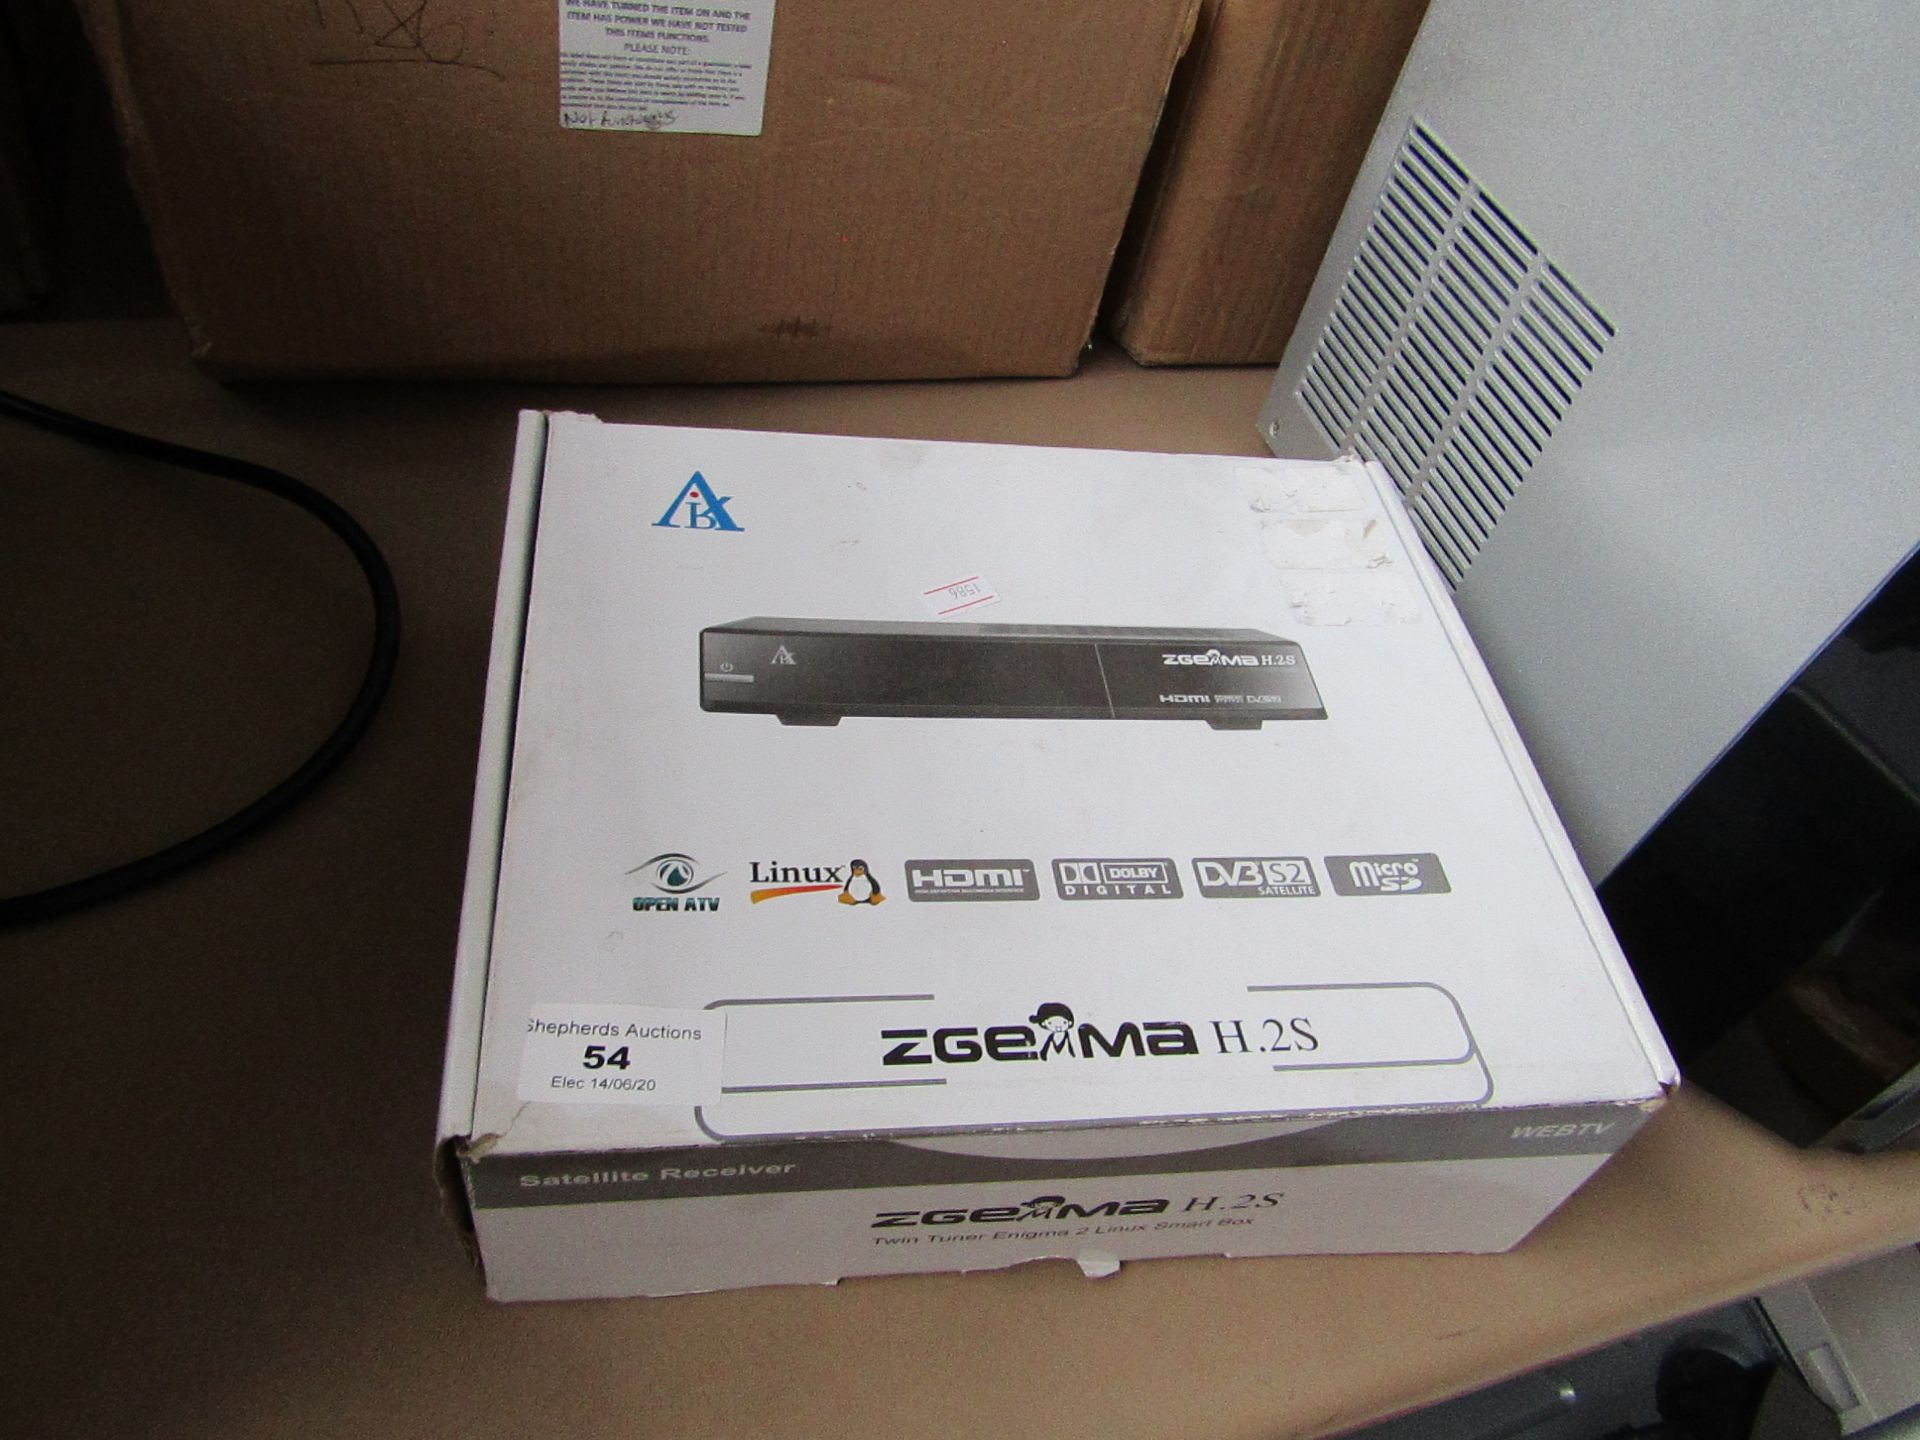 Zgemma H.2S linux based DVB-S2+S2 twin tuner receiver, unchecked and boxed.